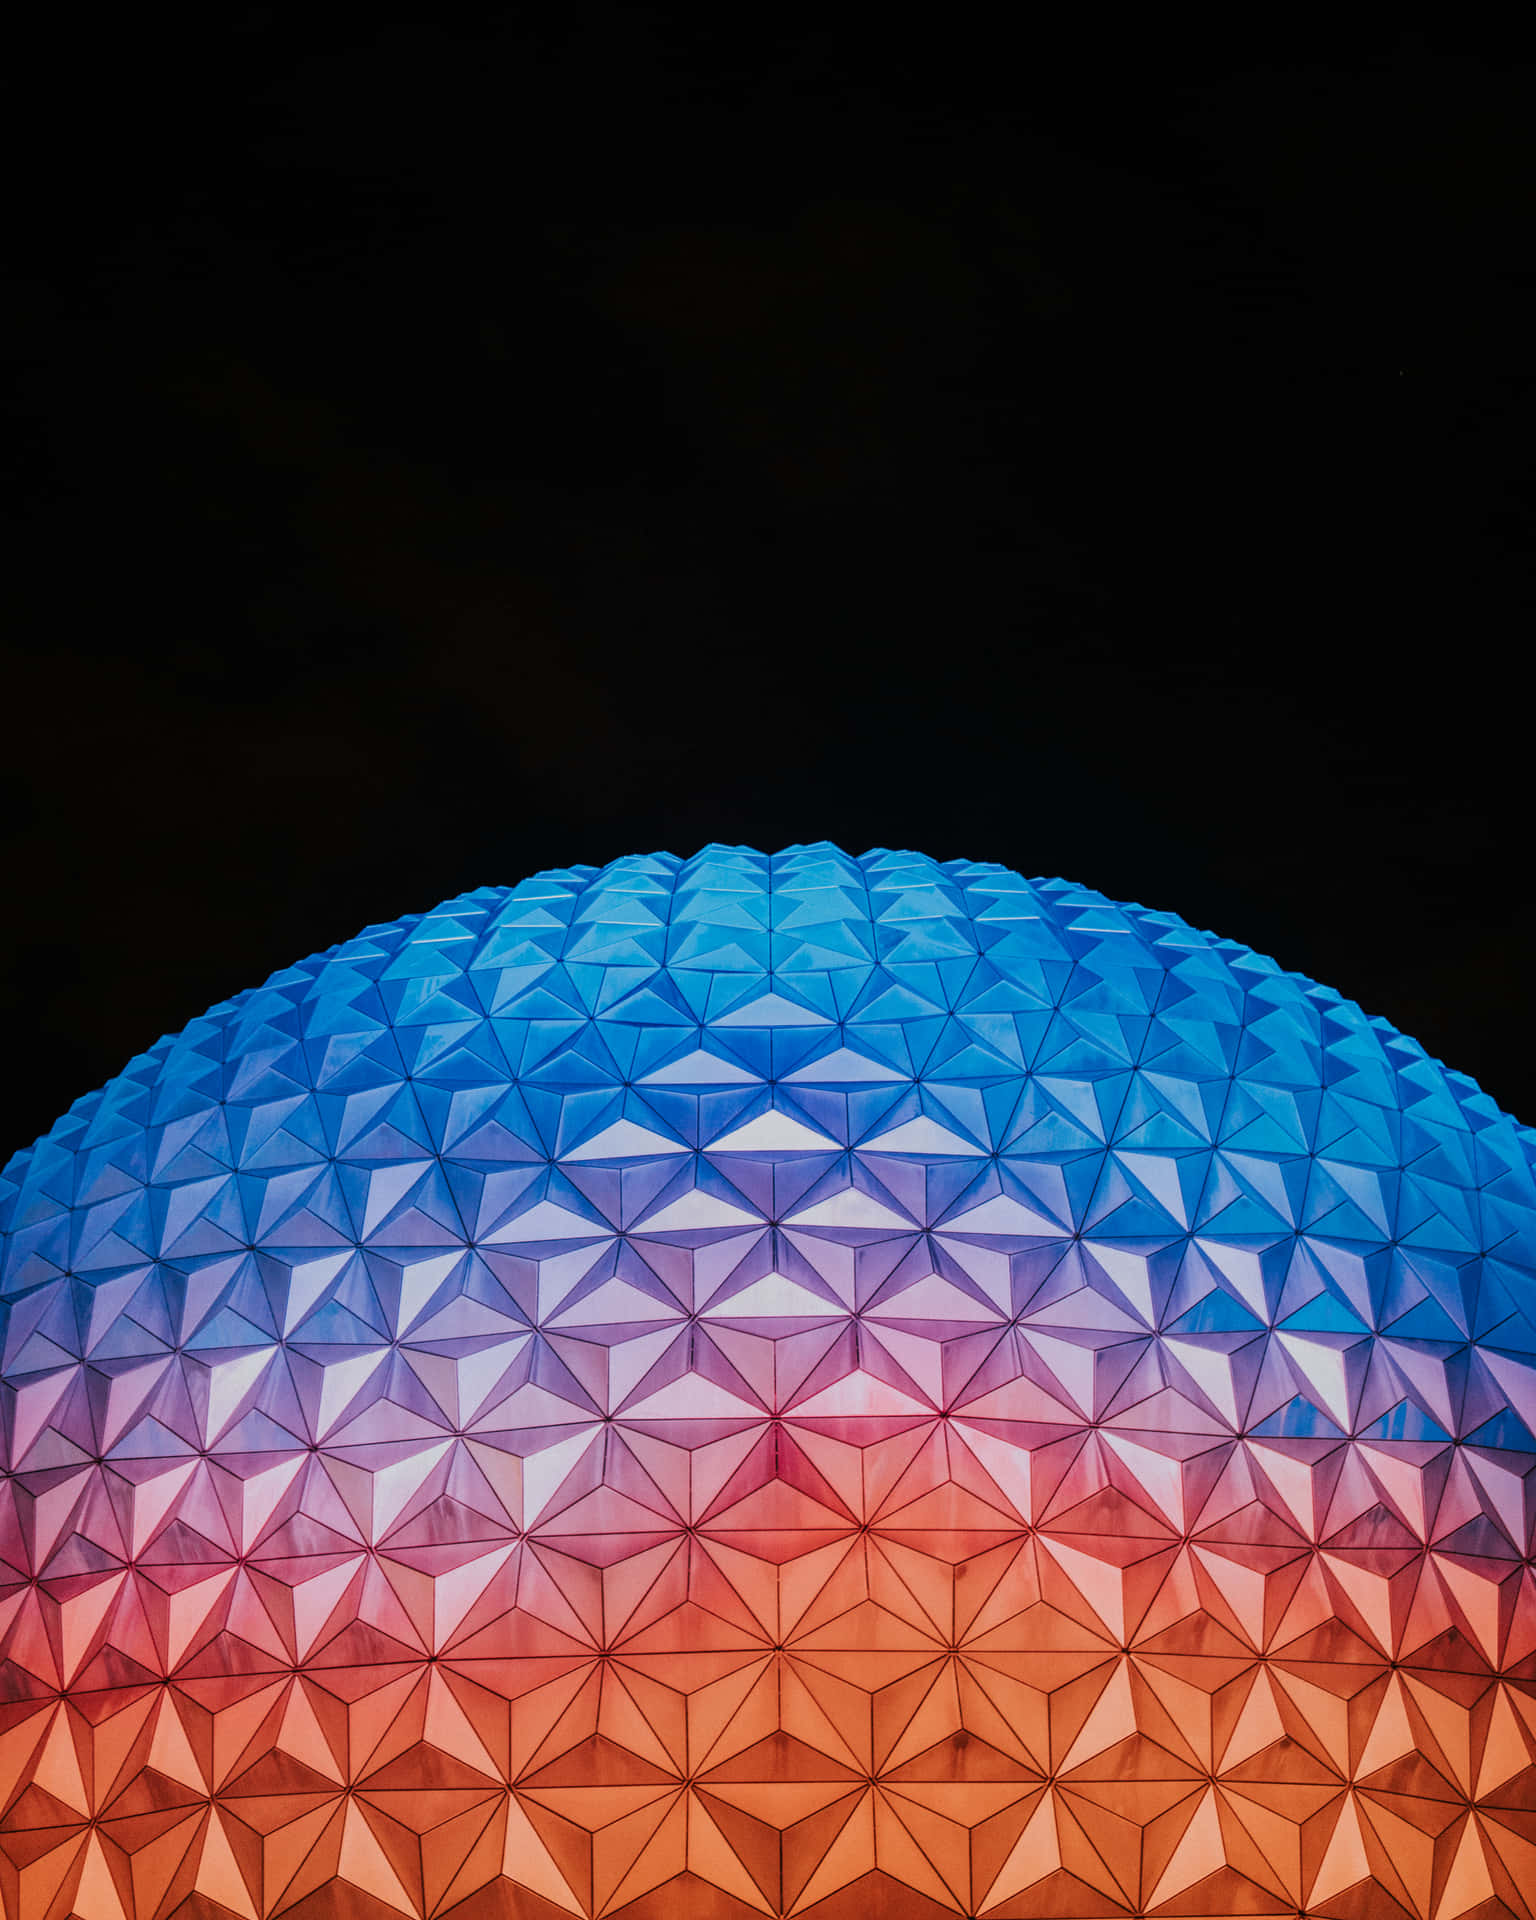 "Bring some vivid color to your screen with Vibrant Super Amoled!" Wallpaper